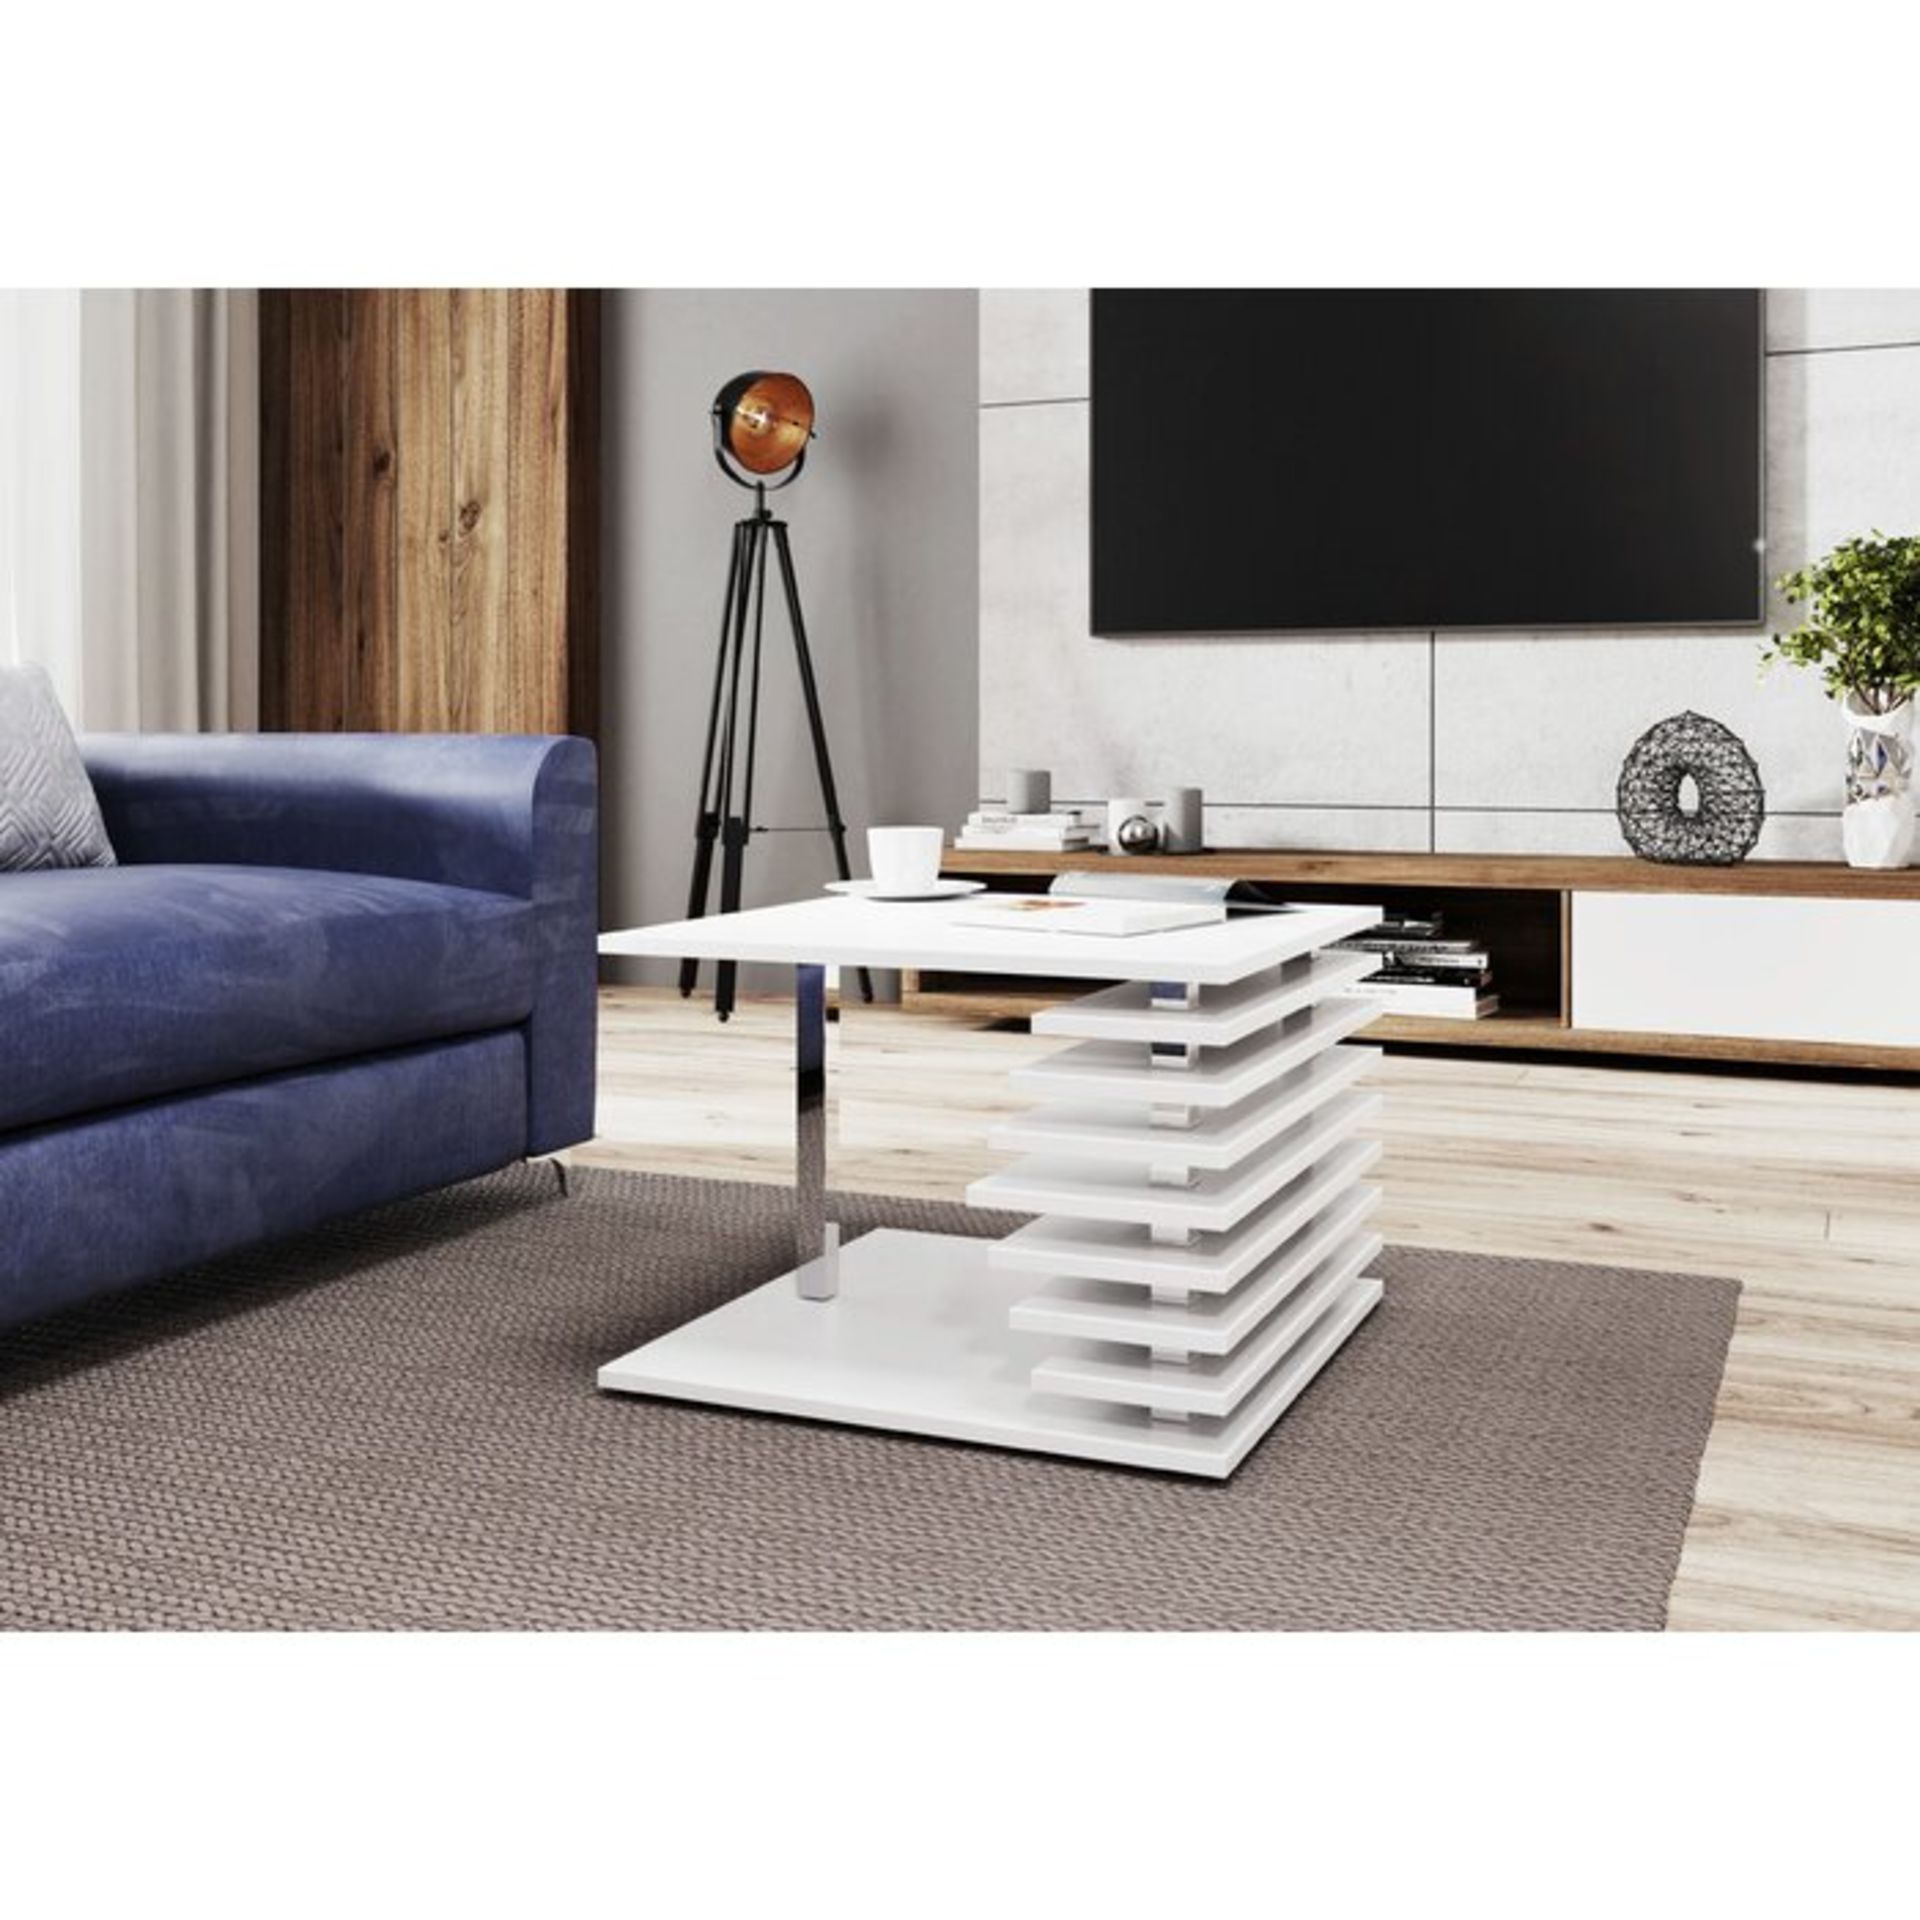 Matteo Coffee Table - RRP £90.00 - Image 2 of 3